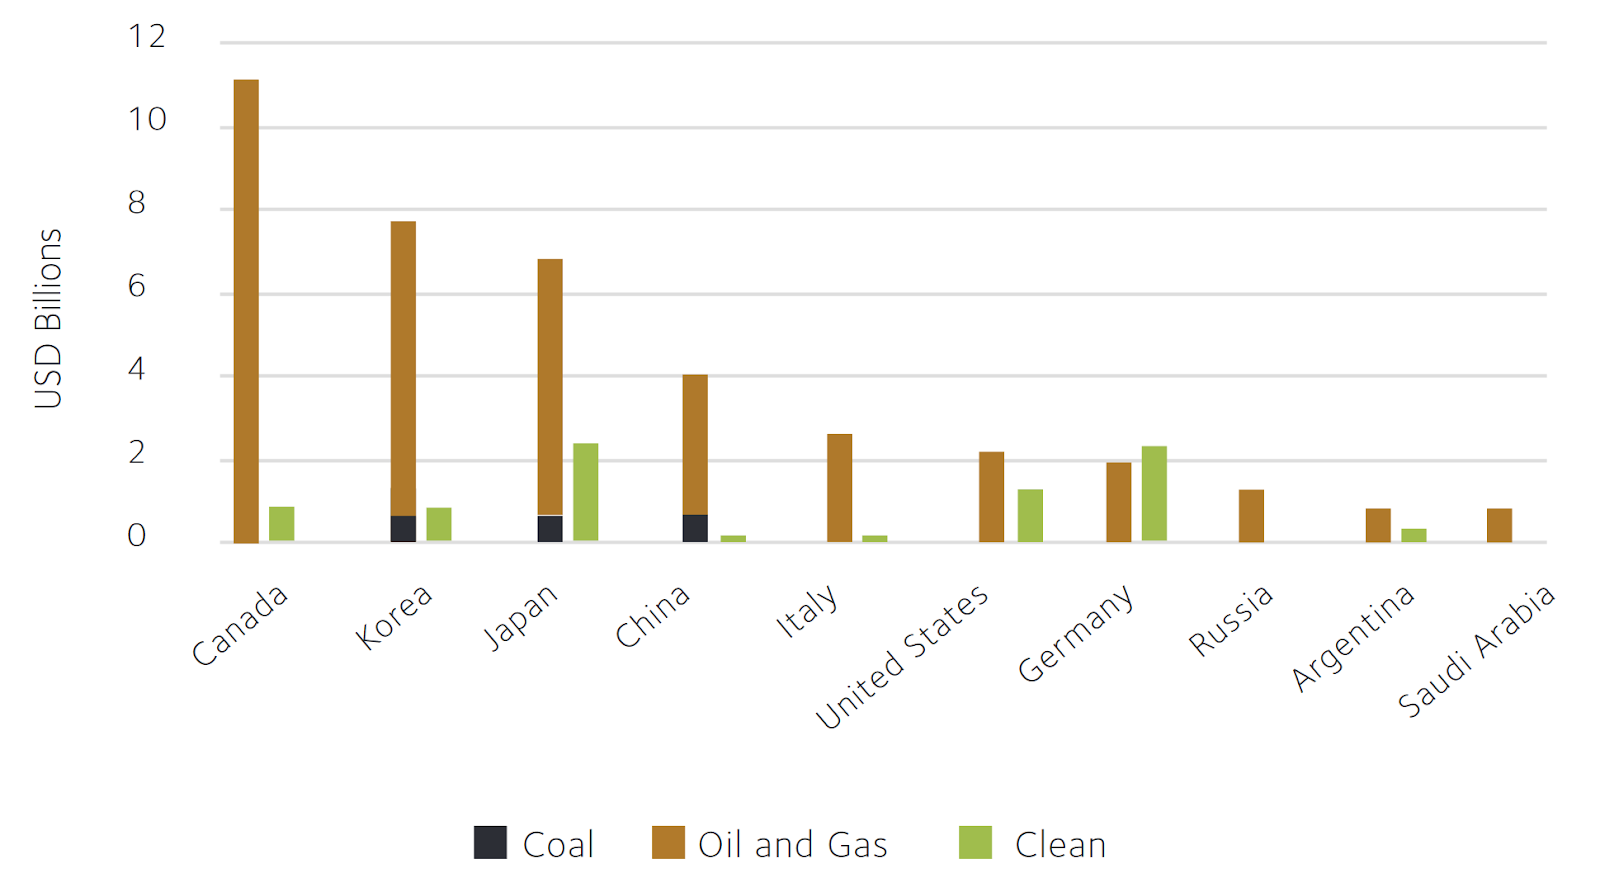 Top 10 G20 Country Providers of International Public Finance of Fossil Fuels Compared to Clean Energy, 2020 - 2022, USD Billions, Source: Price of Oil